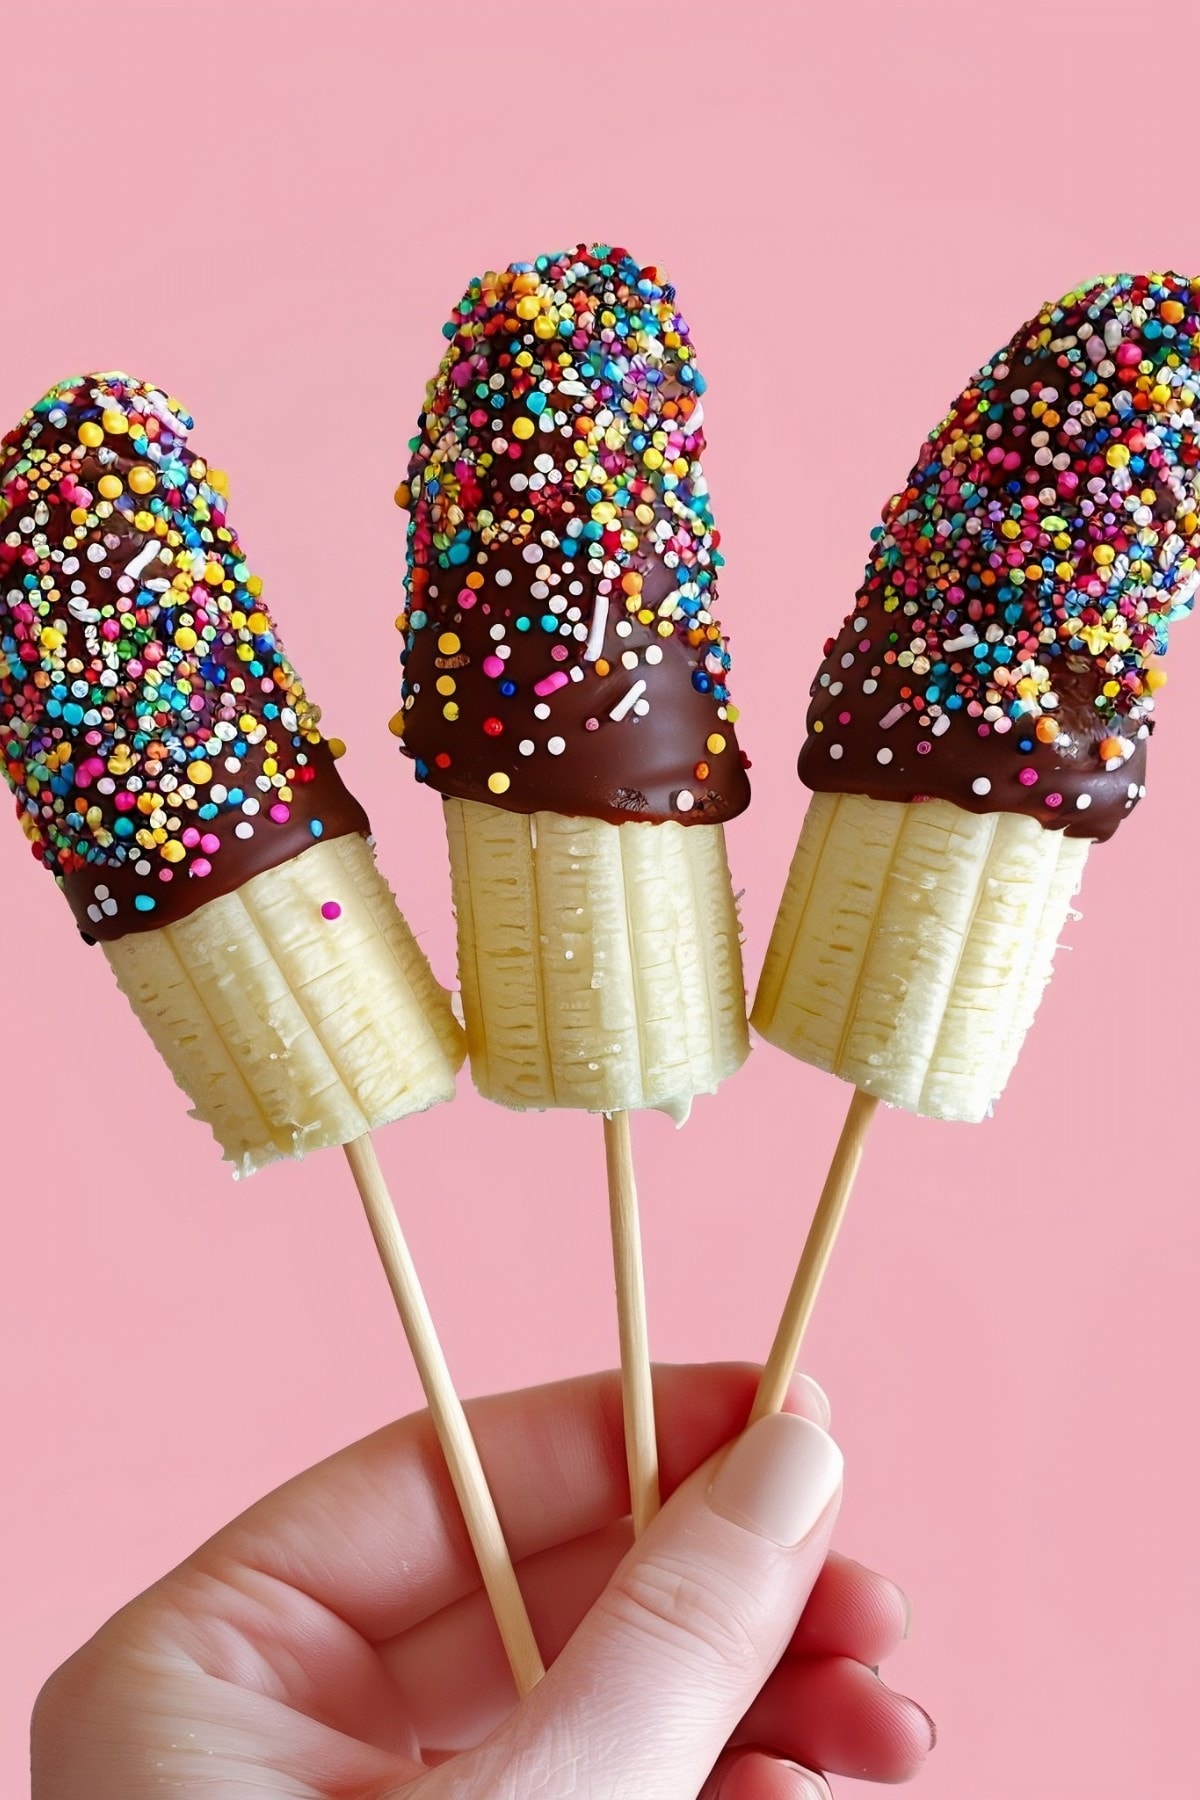 Chocolate Covered Bananas with sprinkles